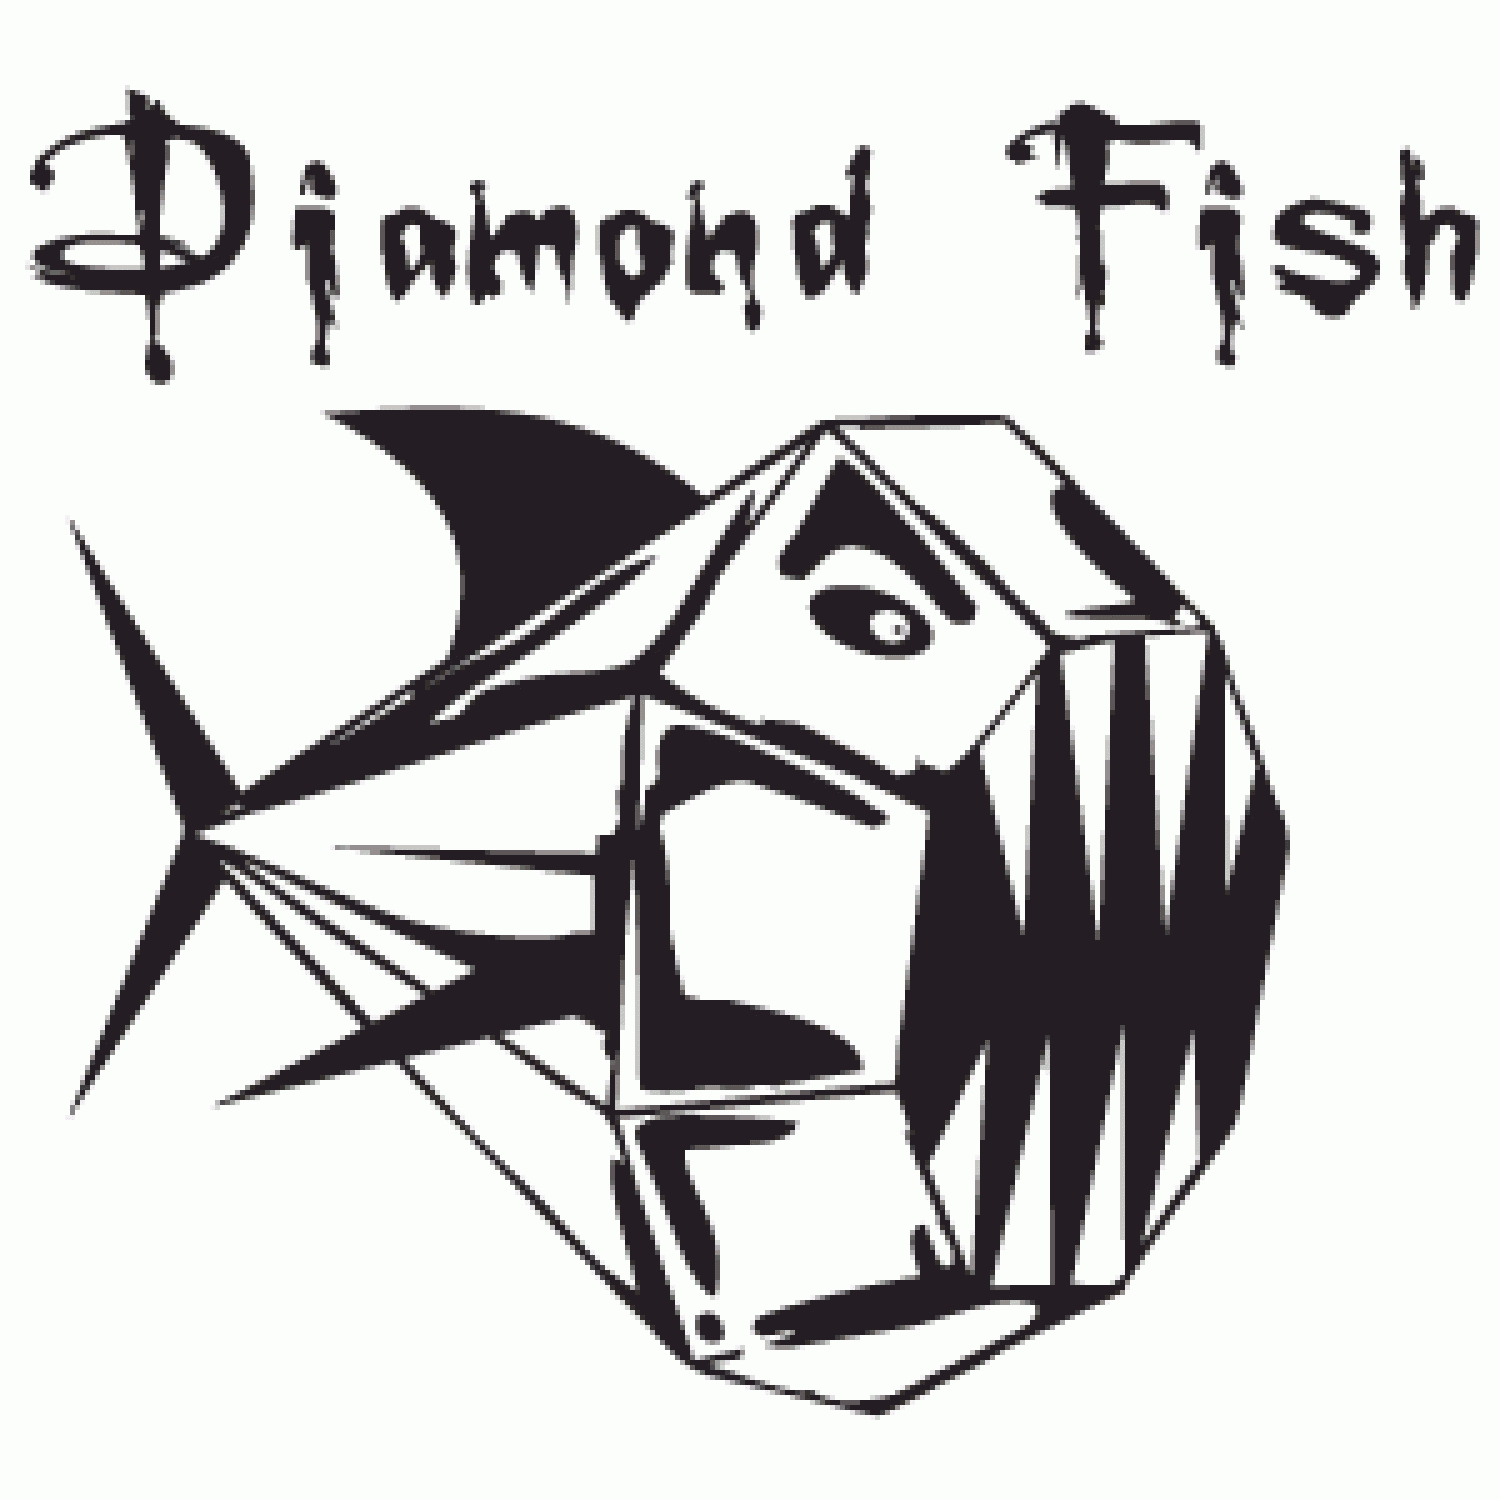 Today's YES SURFER 「Roberts Diamond Fish 5.6」